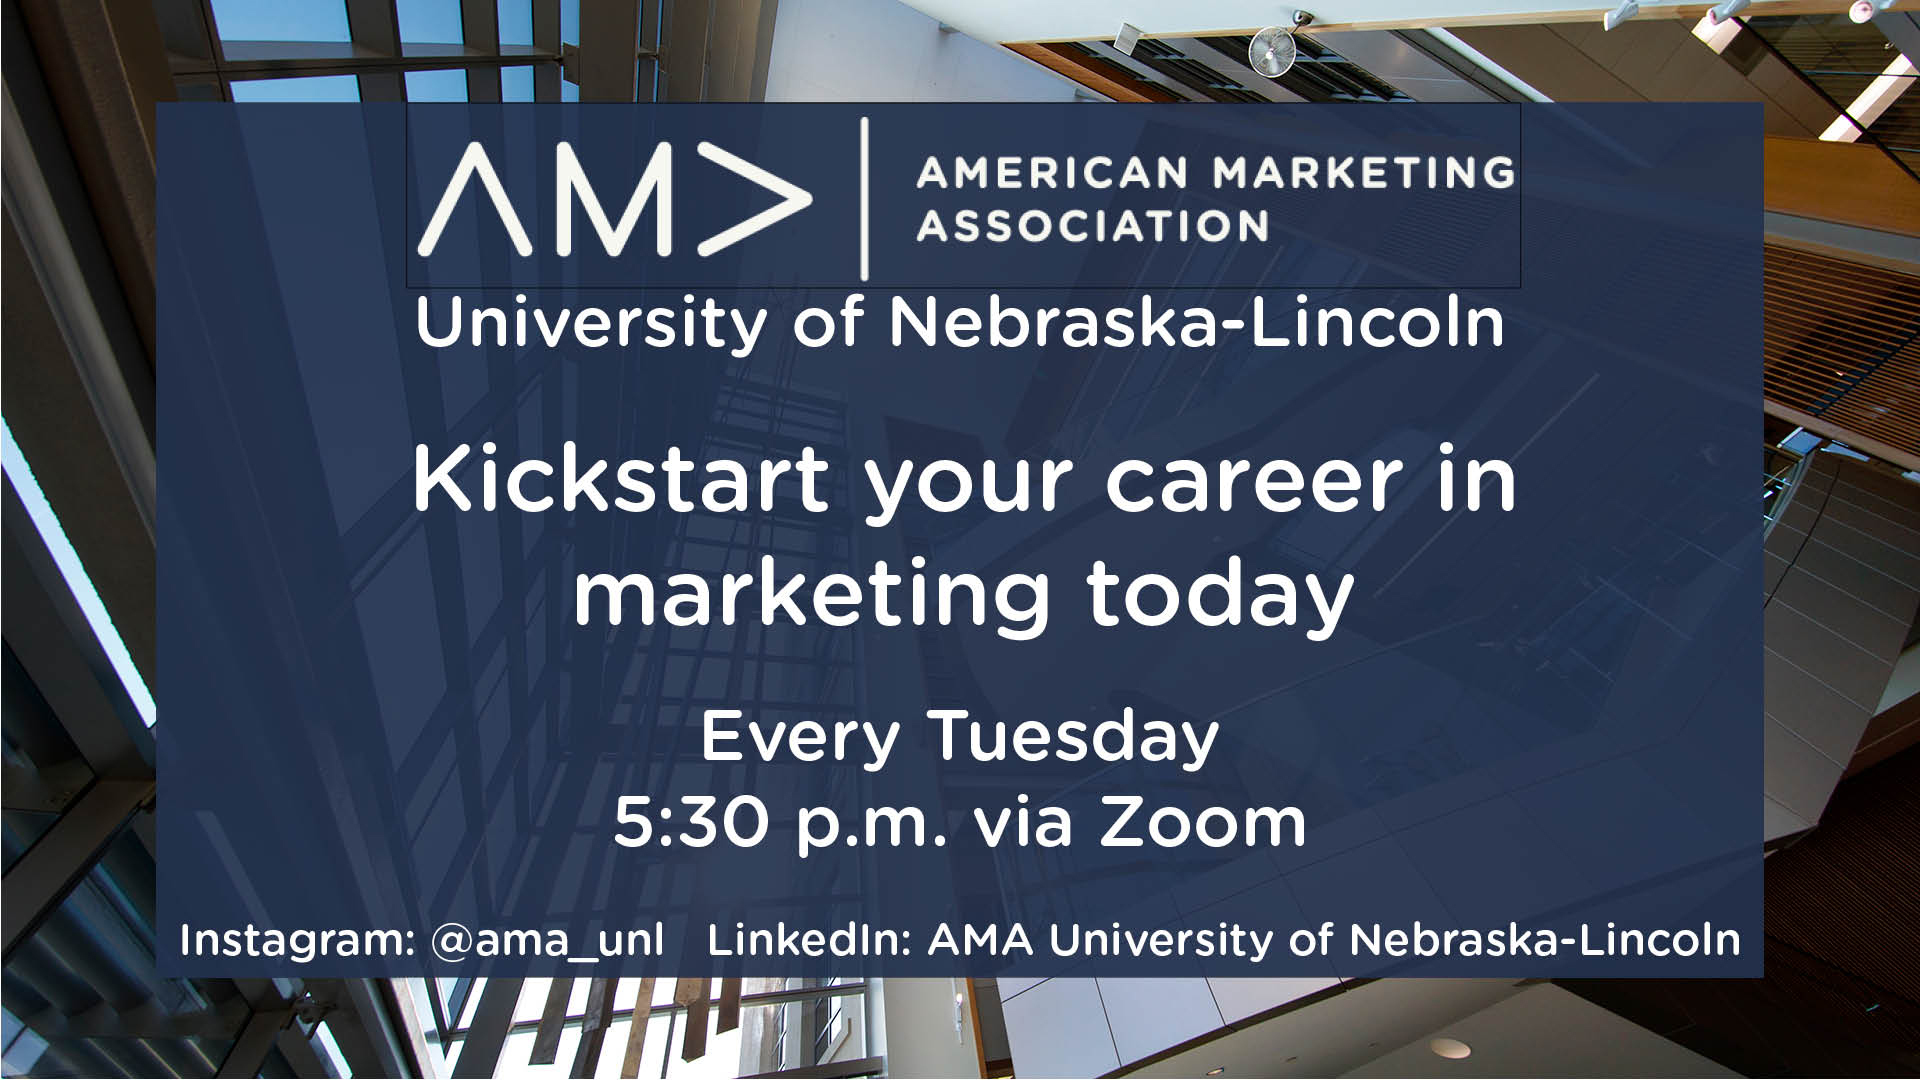 Join the American Marketing Association